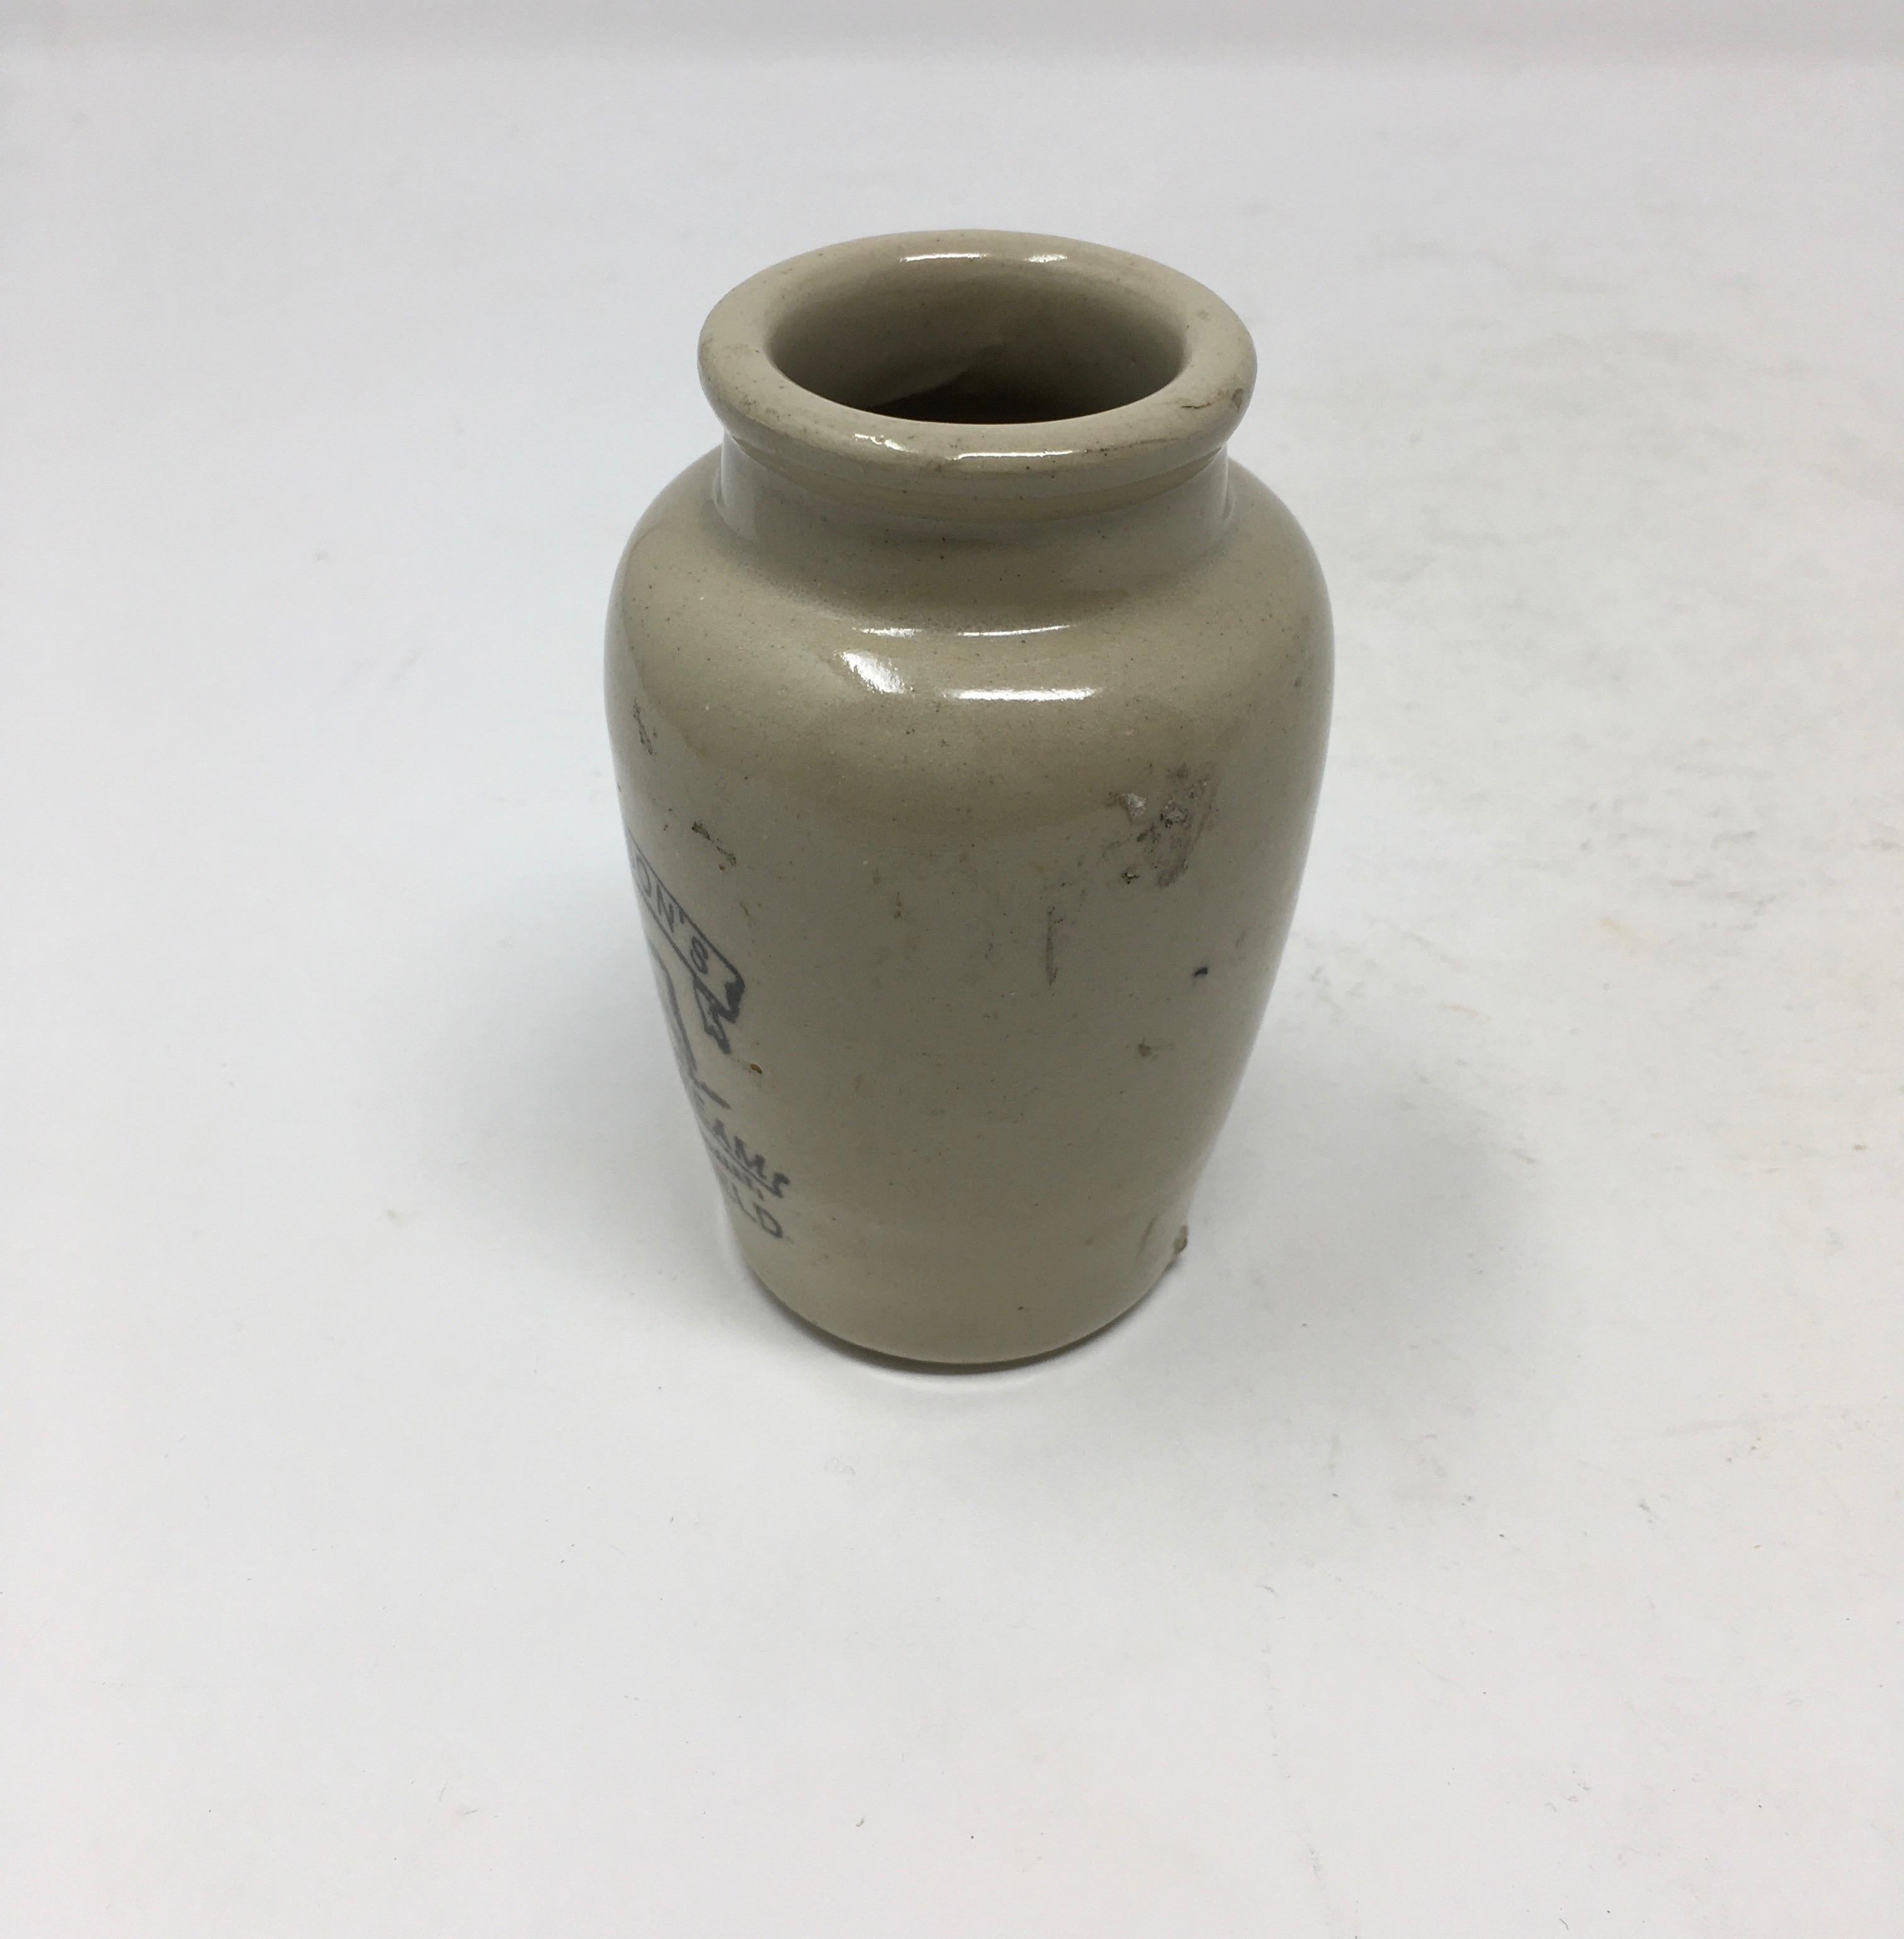 Found in England, this vintage Richardson's thick-cream ironstone advertising jar from Sheffield is in good clean condition. The decorative pot that once held cream has transfer on the front in black lettering under the glaze and a picture of a cow